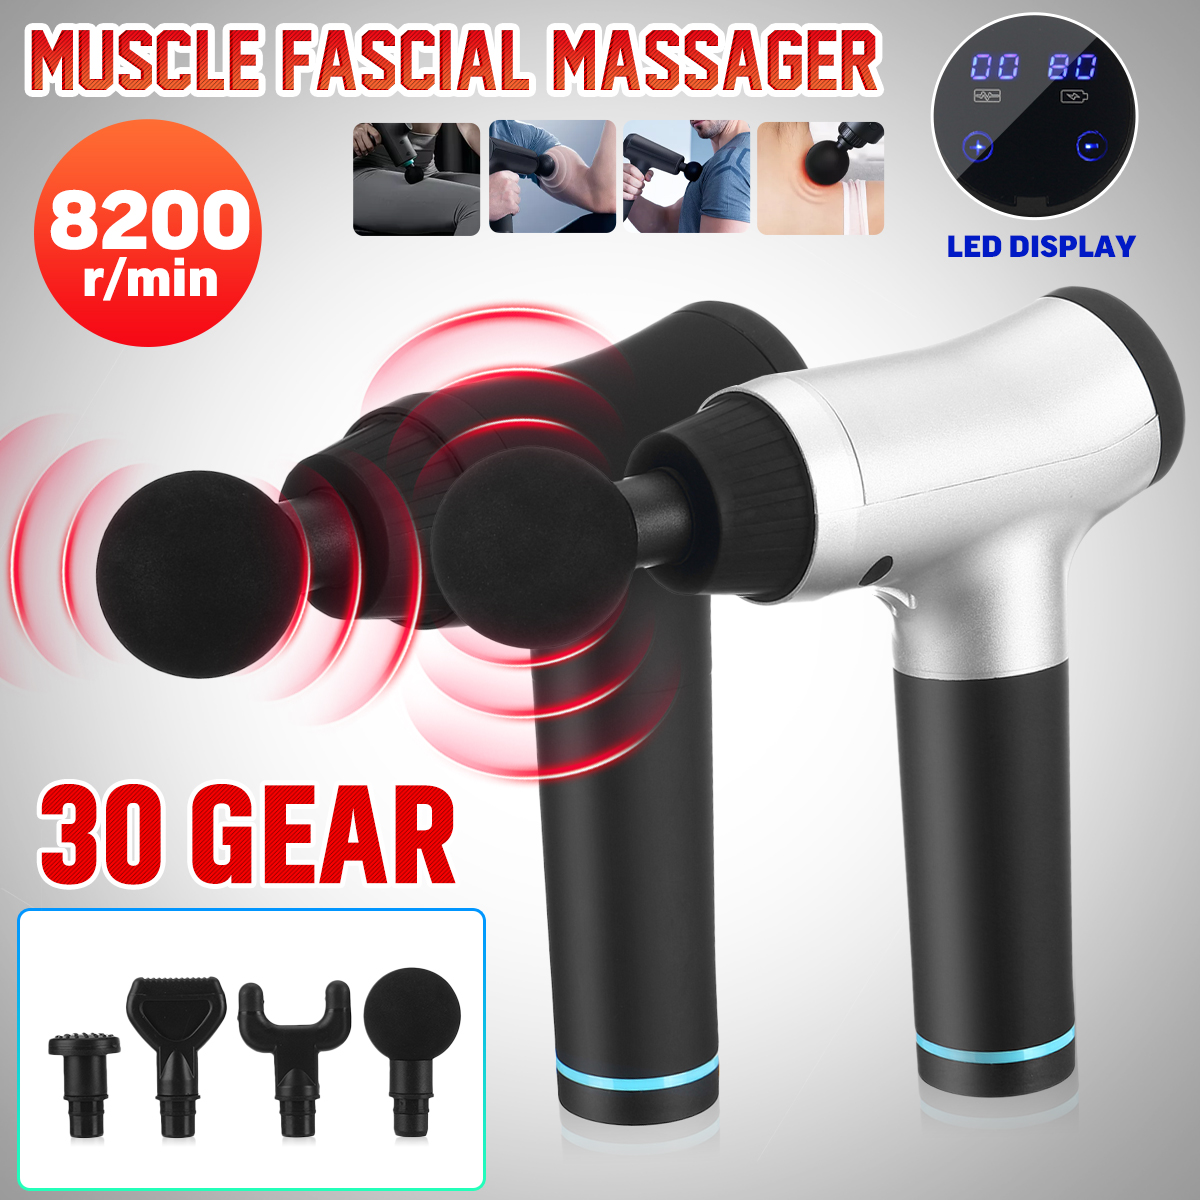 KALOAD-8200rmin-30-Gears-Adjustment-Muscle-Fascial-Massager-With-4-Massage-Heads-Abdominal-Muscle-Re-1726251-1